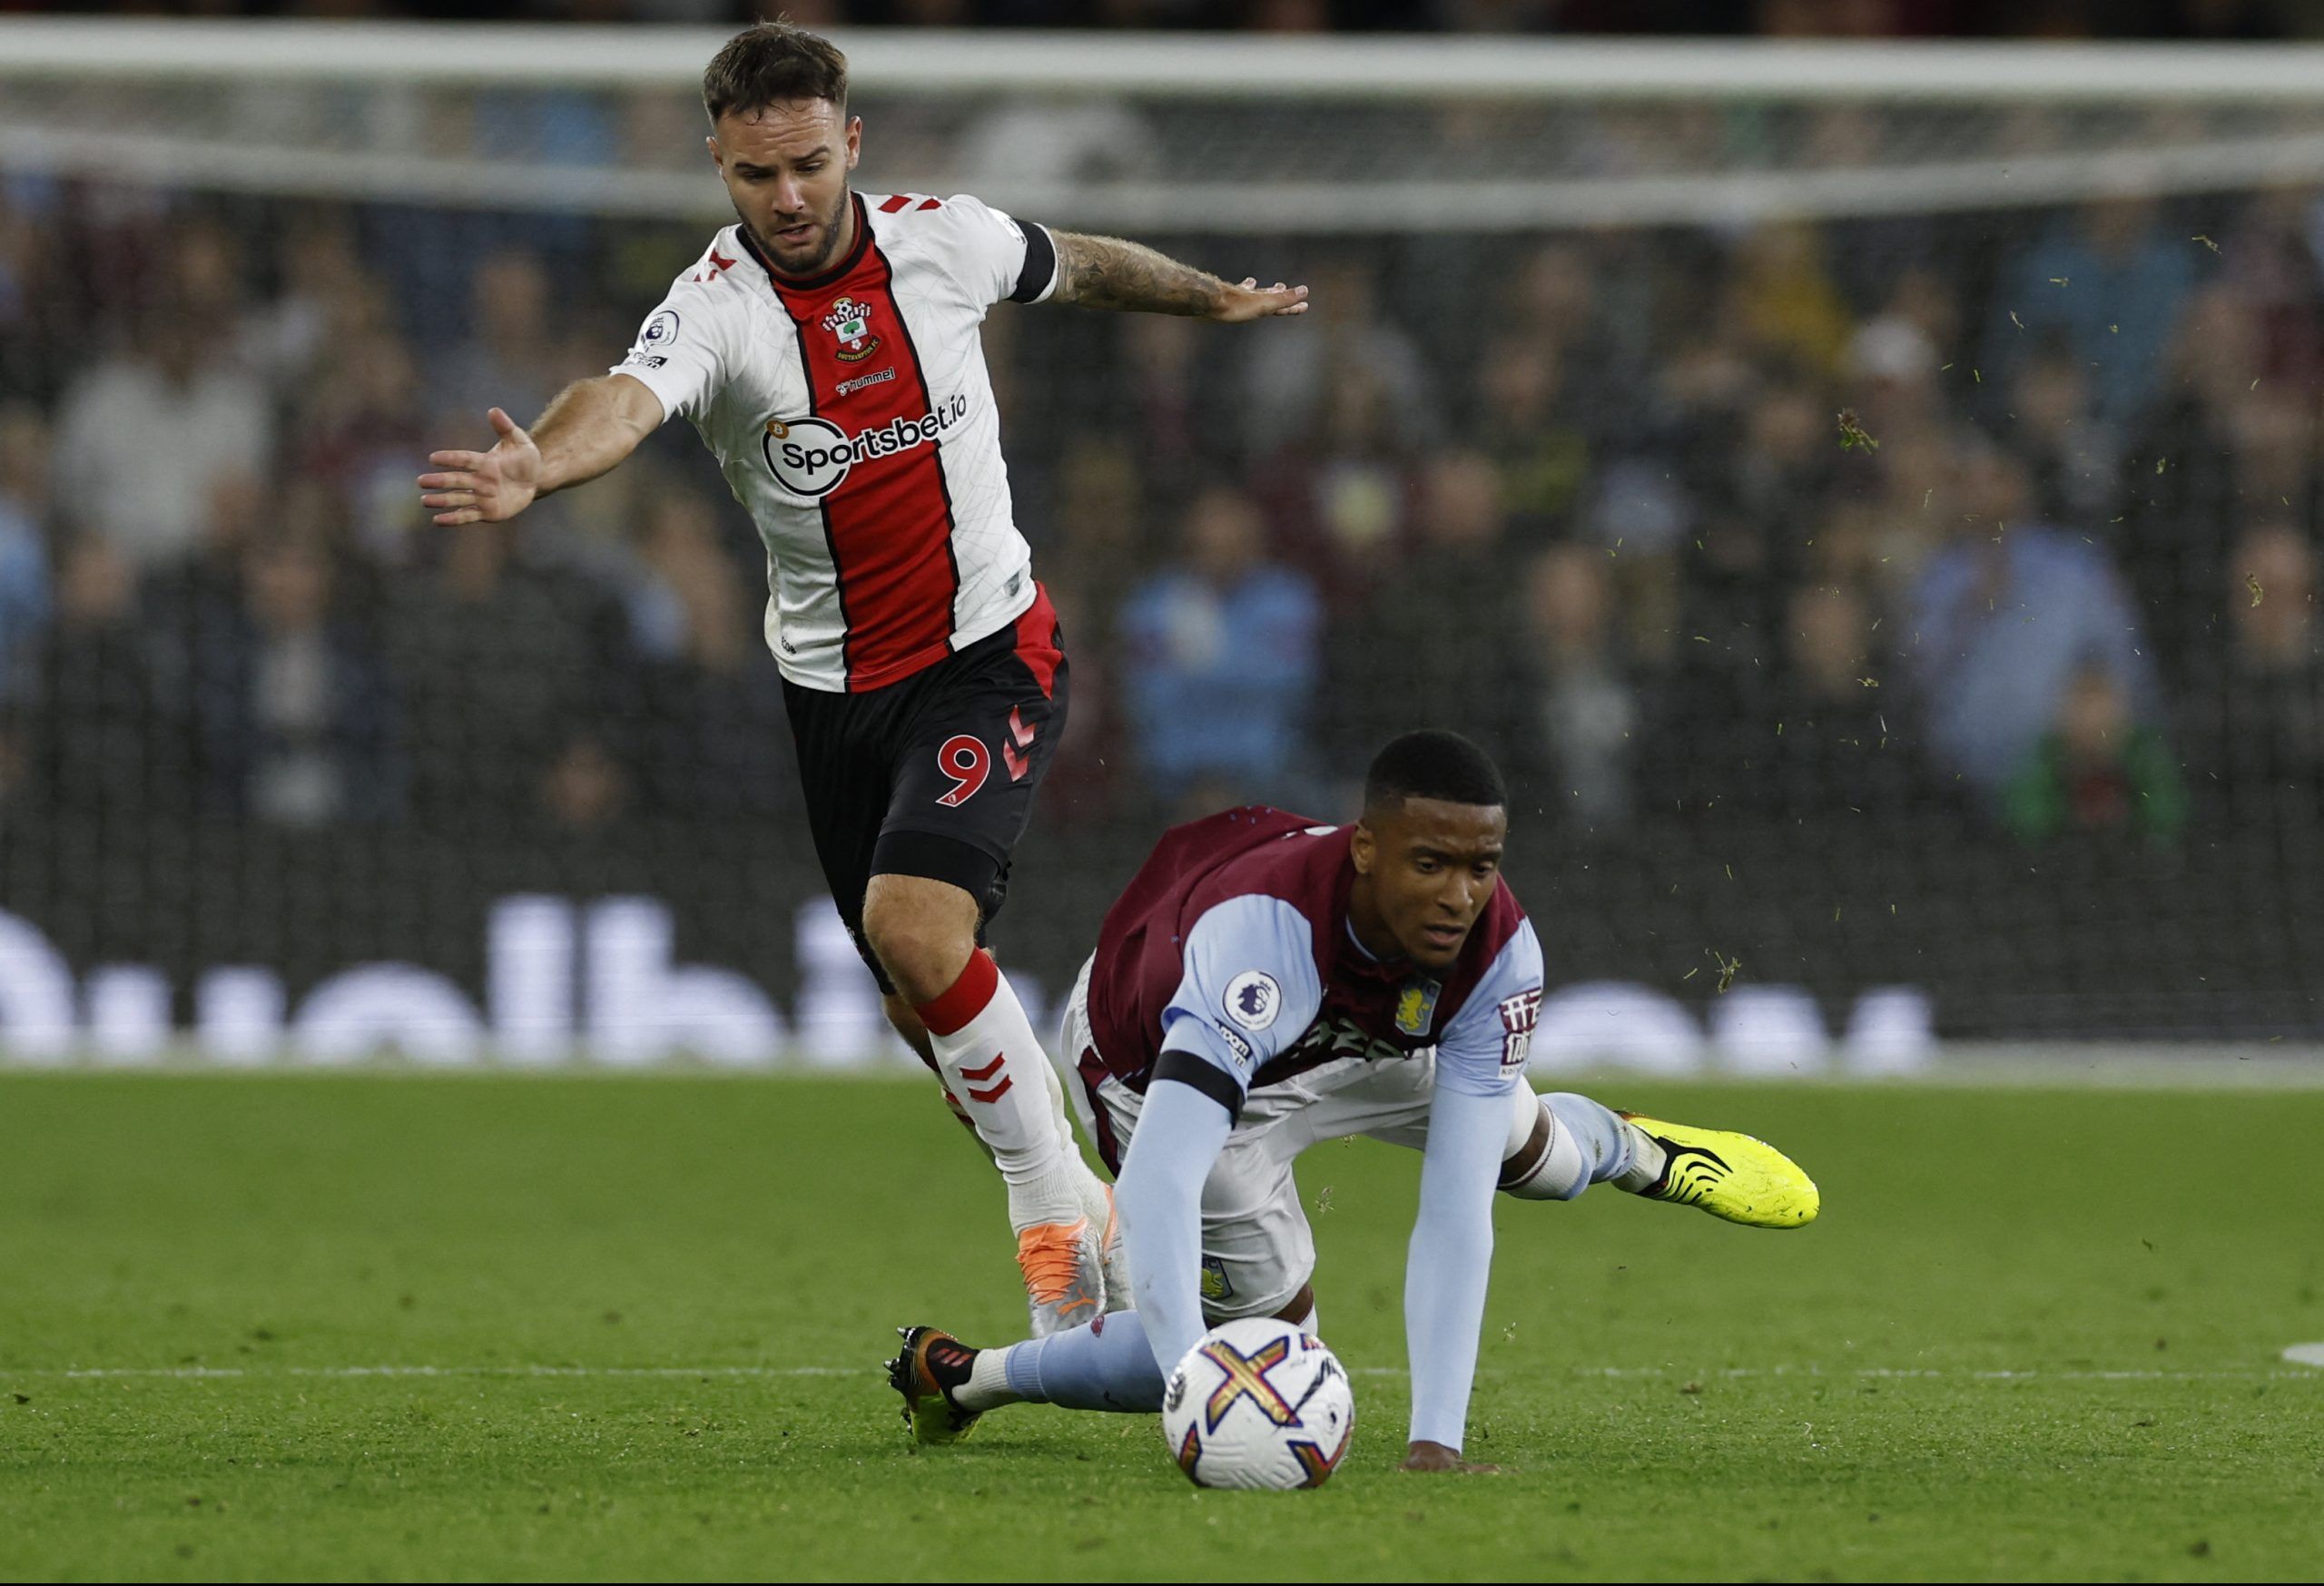 Soccer Football - Premier League - Aston Villa v Southampton - Villa Park, Birmingham, Britain - September 16, 2022  Southampton's Adam Armstrong in action with Aston Villa's Ezri Konsa Action Images via Reuters/Jason Cairnduff EDITORIAL USE ONLY. No use with unauthorized audio, video, data, fixture lists, club/league logos or 'live' services. Online in-match use limited to 75 images, no video emulation. No use in betting, games or single club /league/player publications.  Please contact your ac